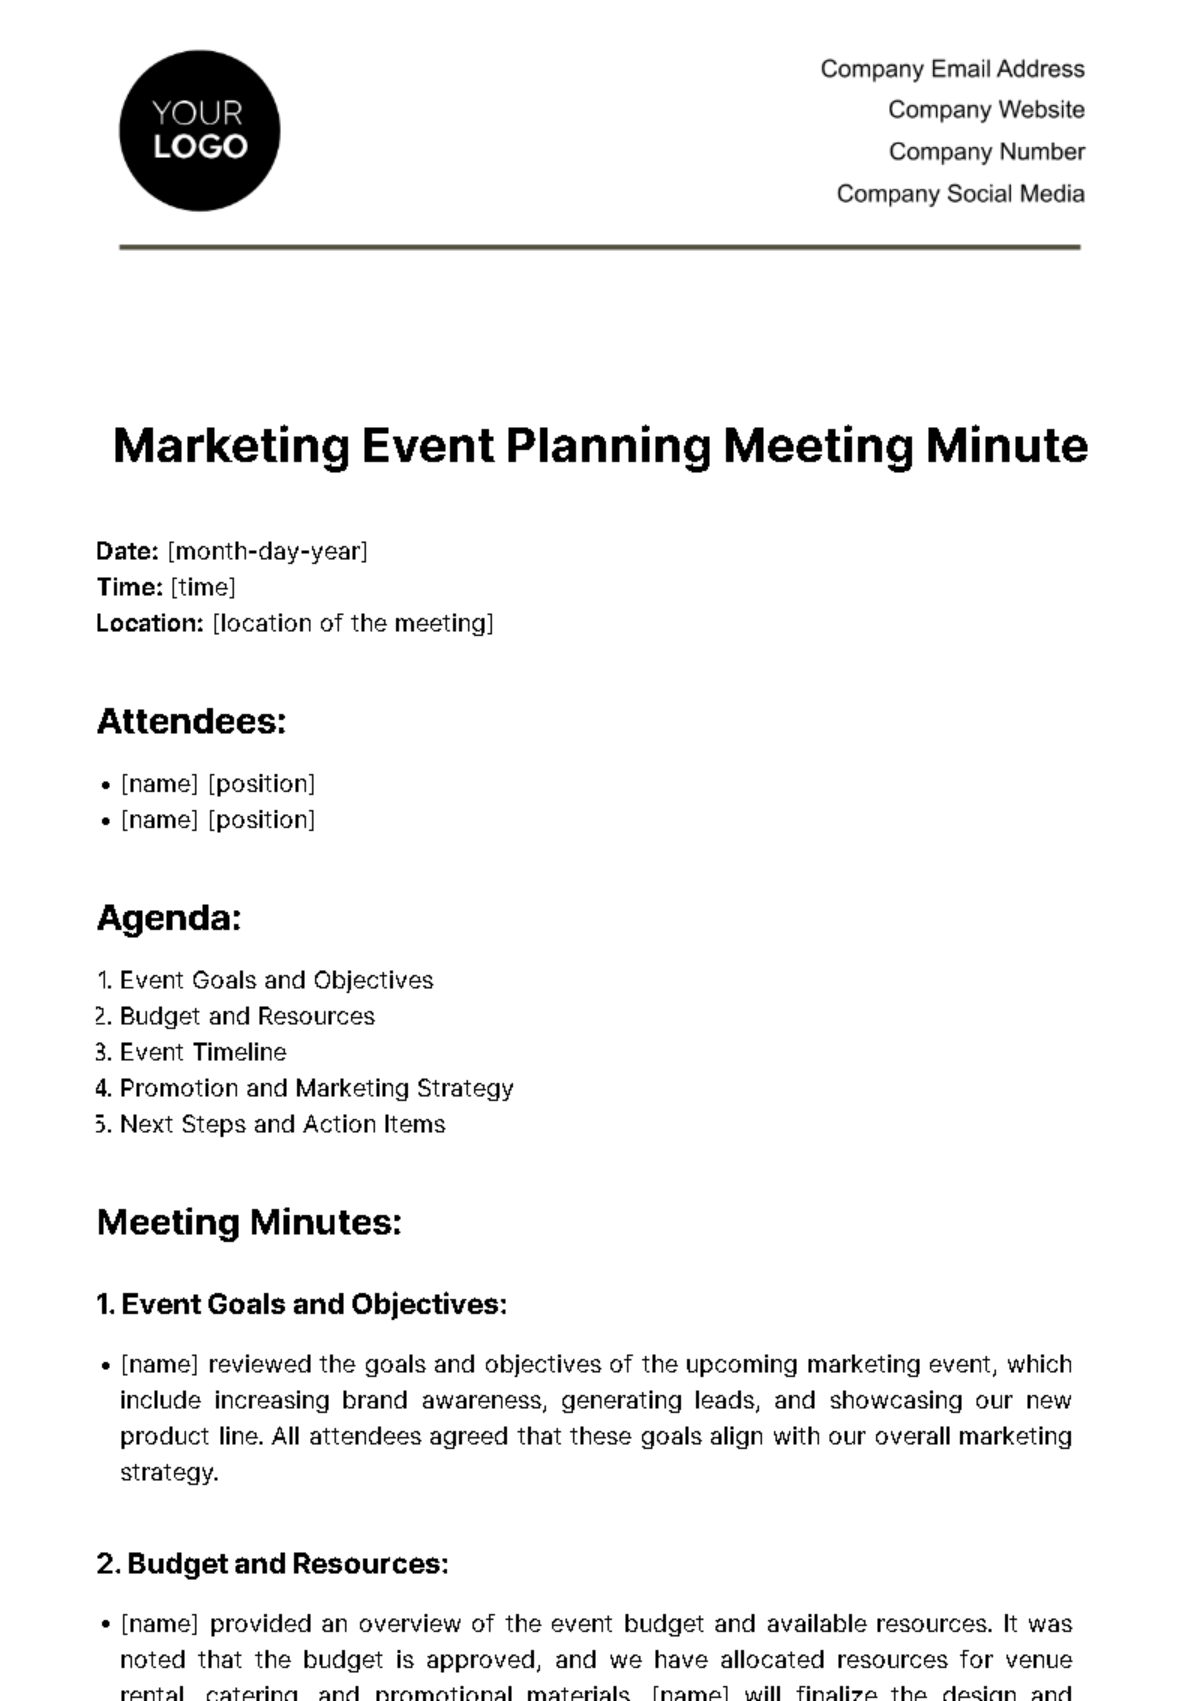 Marketing Event Planning Meeting Minute Template